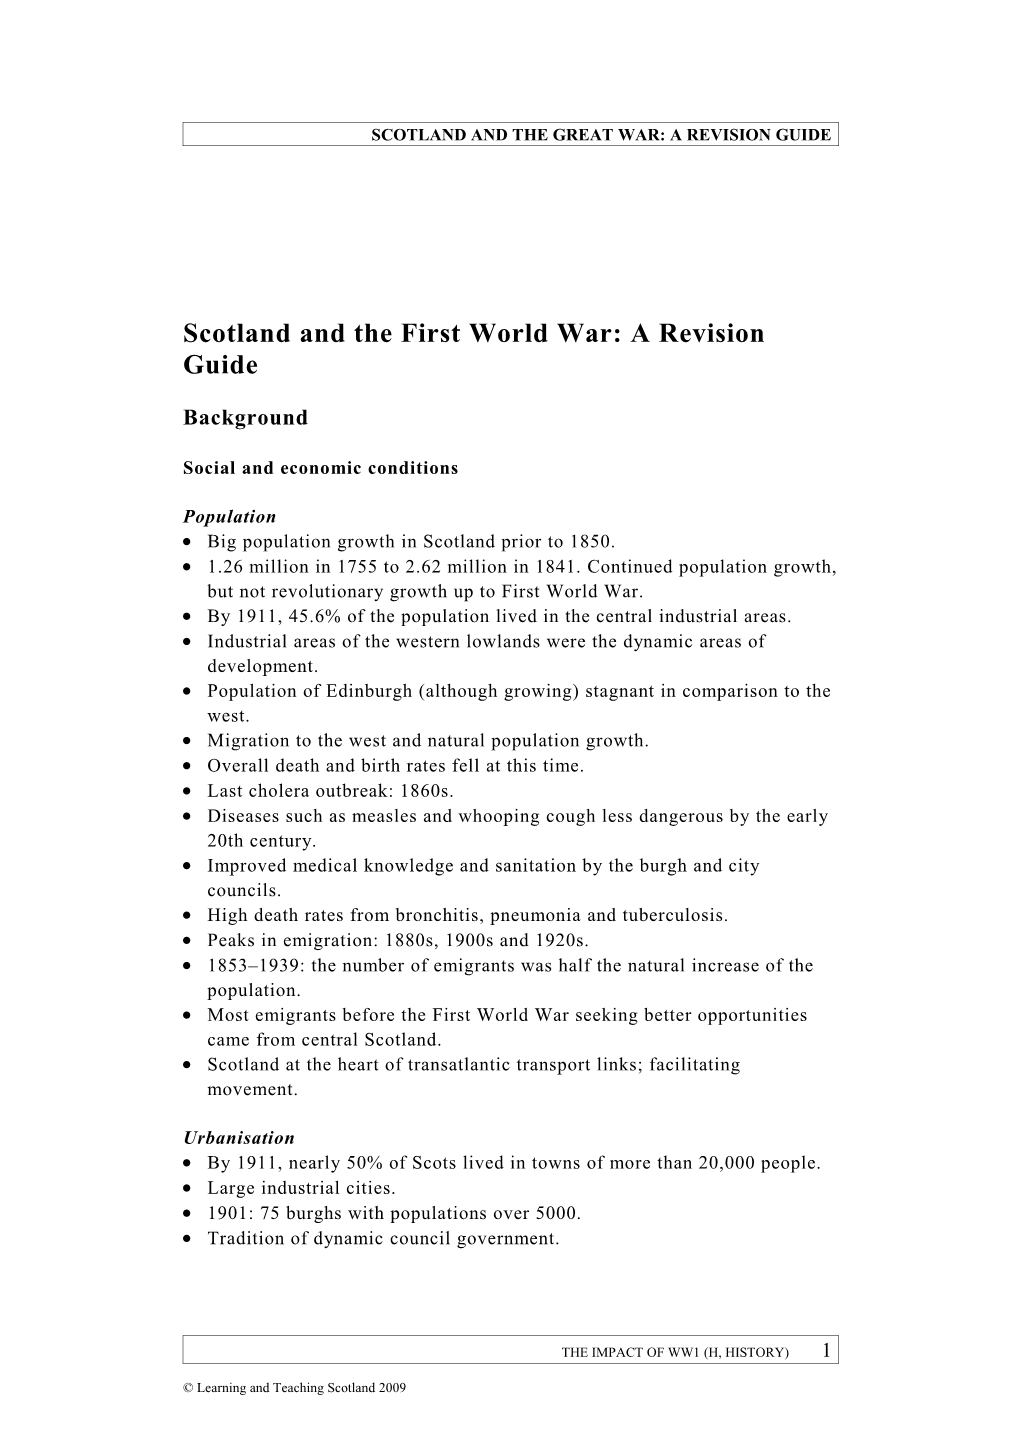 Scotland and the Great War